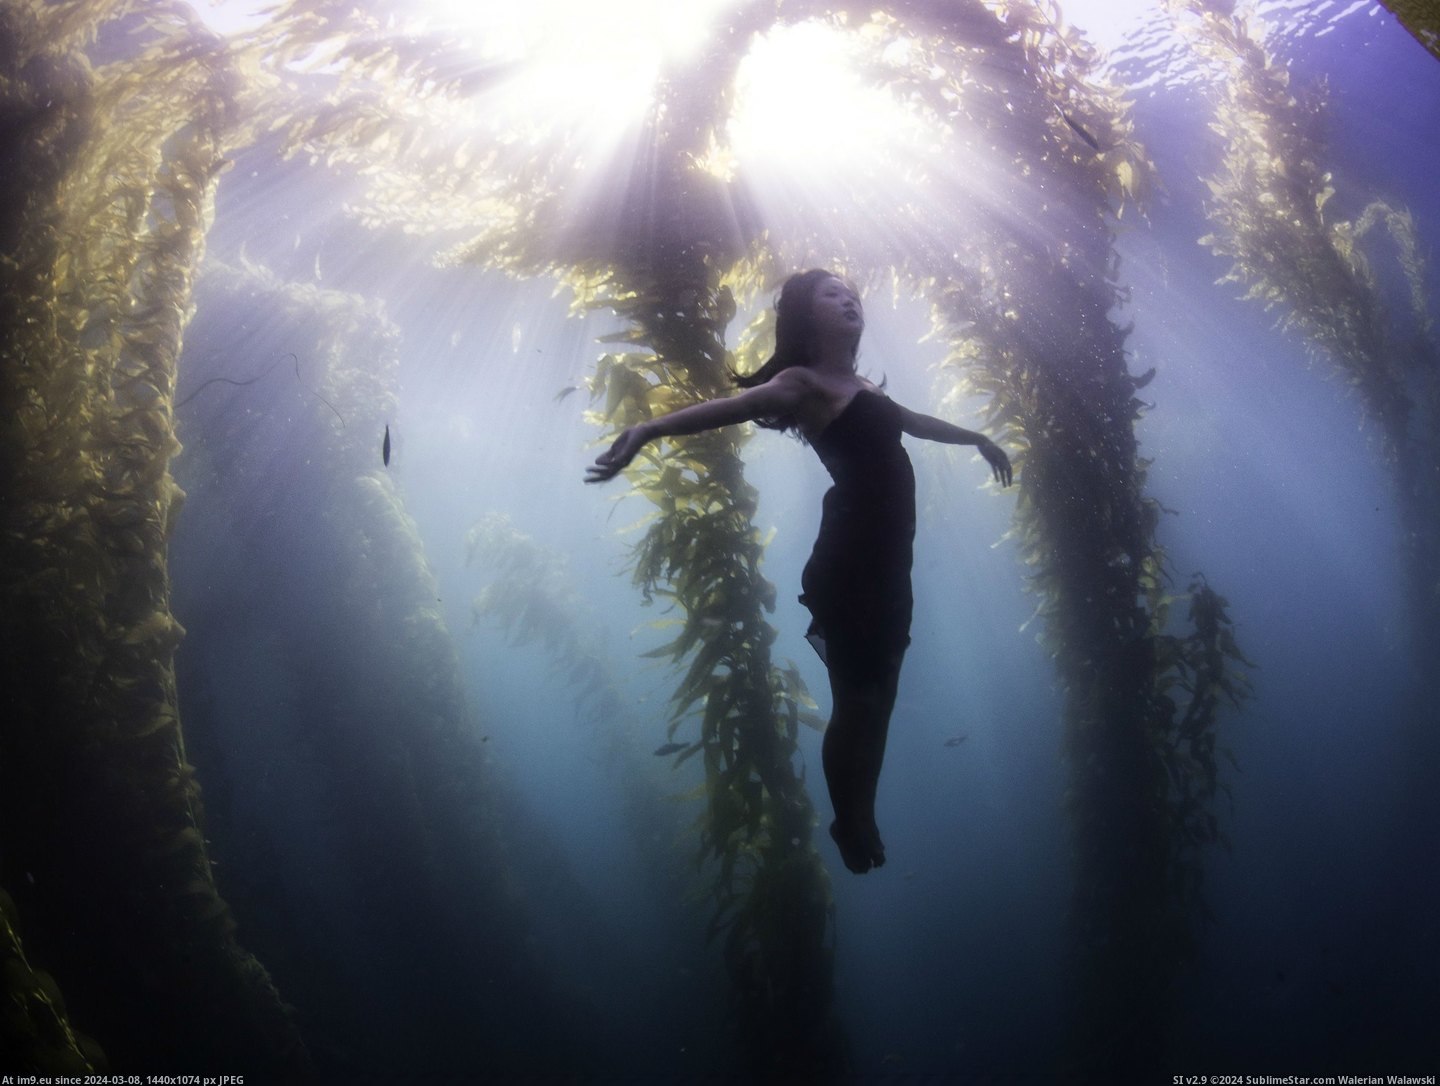 #You #Dress #Jump #Convinced #Kelp #Forest #Bought [Pics] Bought my gf a dress and convinced her to jump into the middle of a kelp forest. What do you think? Pic. (Изображение из альбом My r/PICS favs))